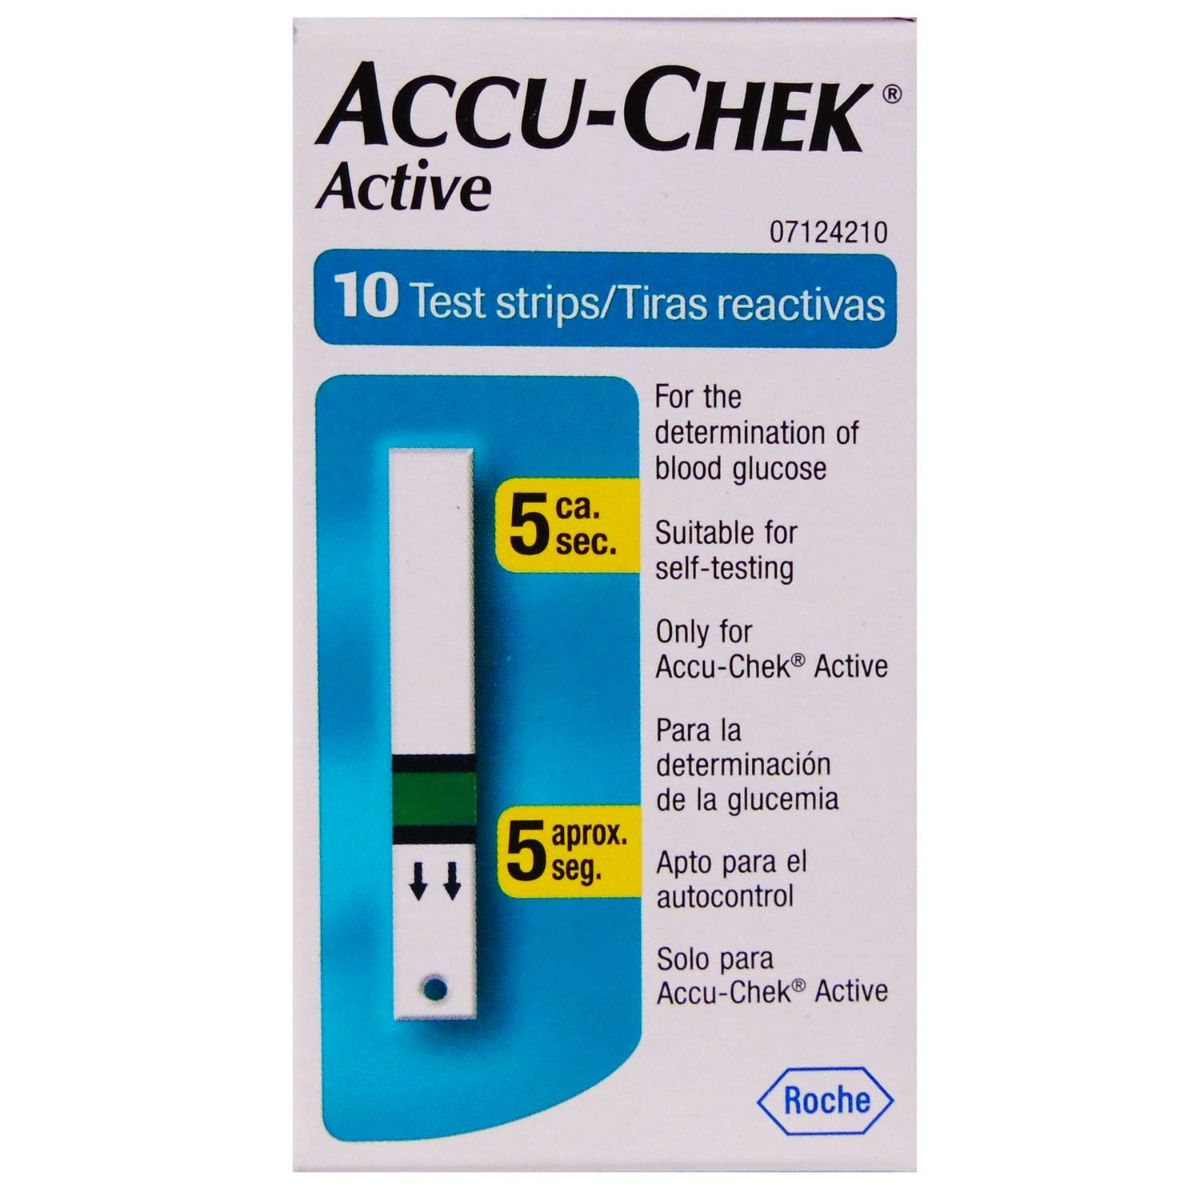 Accu-Chek Active Test Strips, 10 Count, Pack of 1 